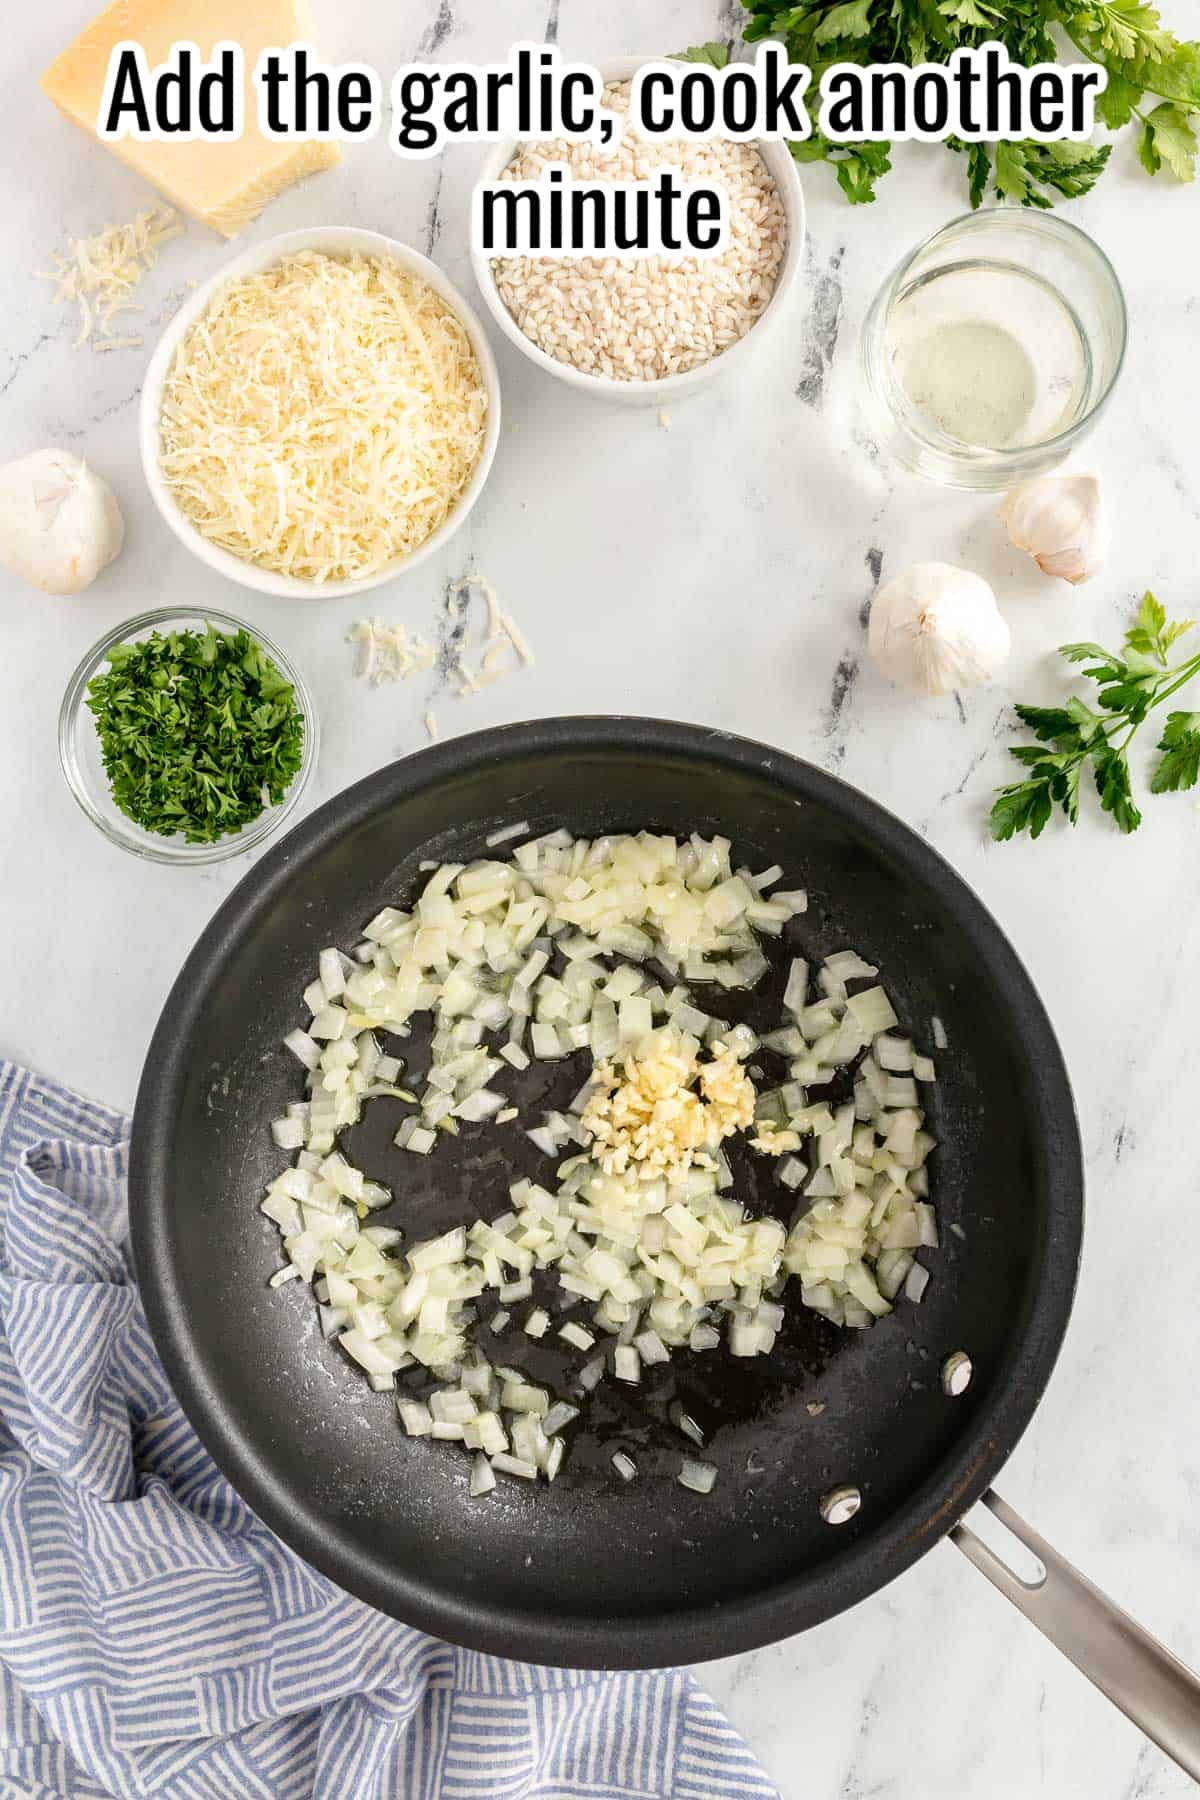 a black skillet with onion and garlic in it.